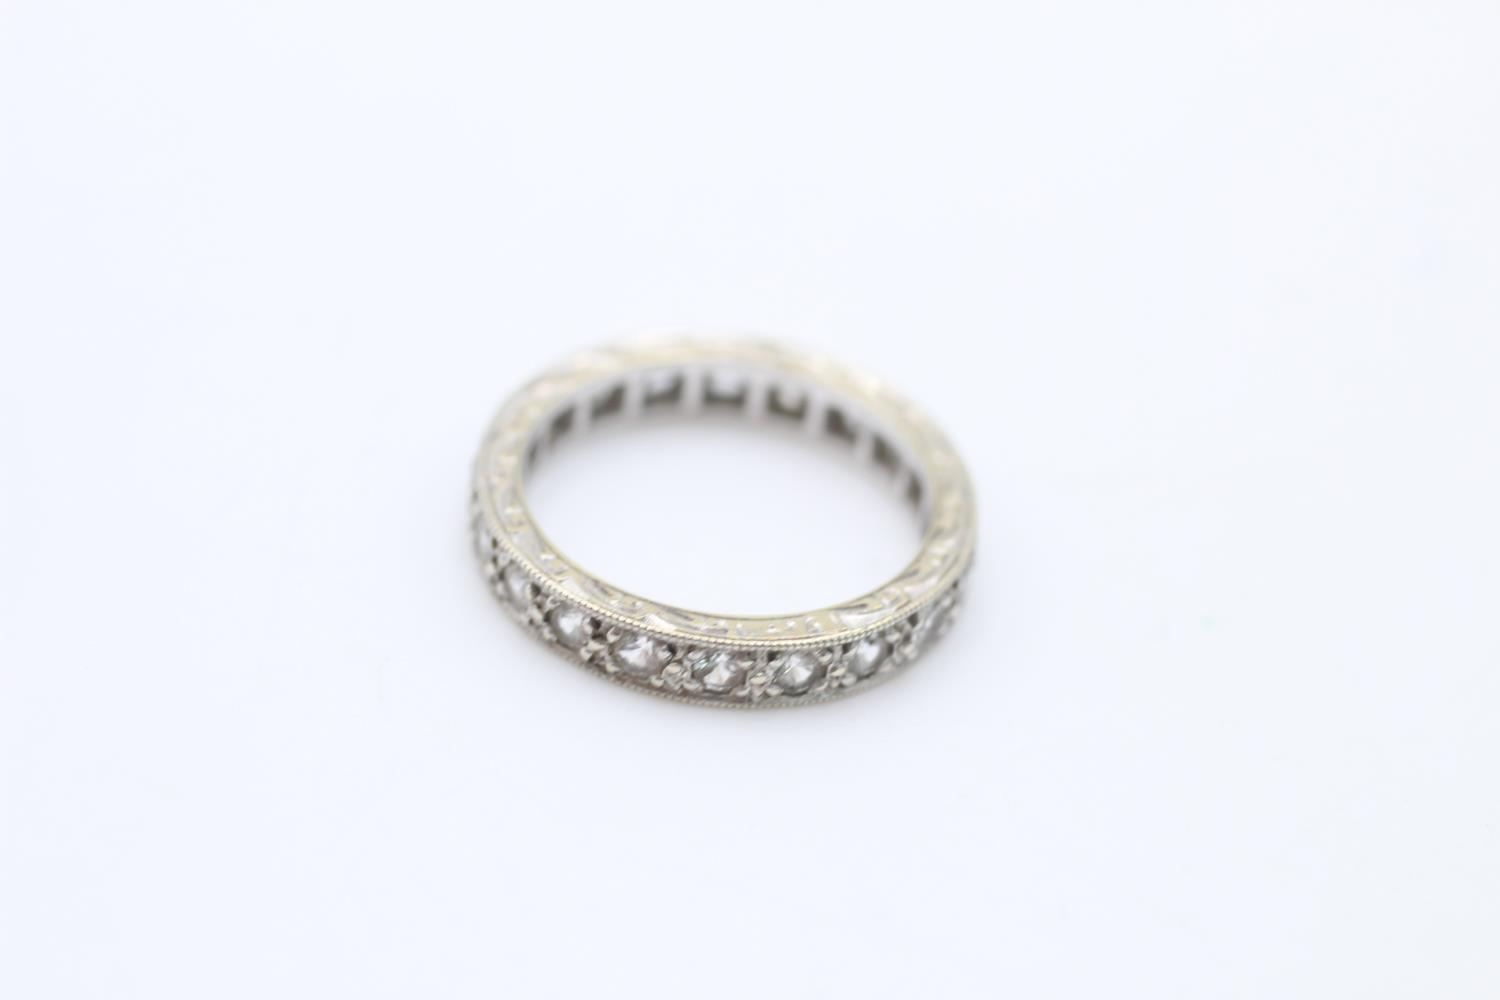 9ct white gold clear gemstone eternity ring (3g) Size K - Image 2 of 4